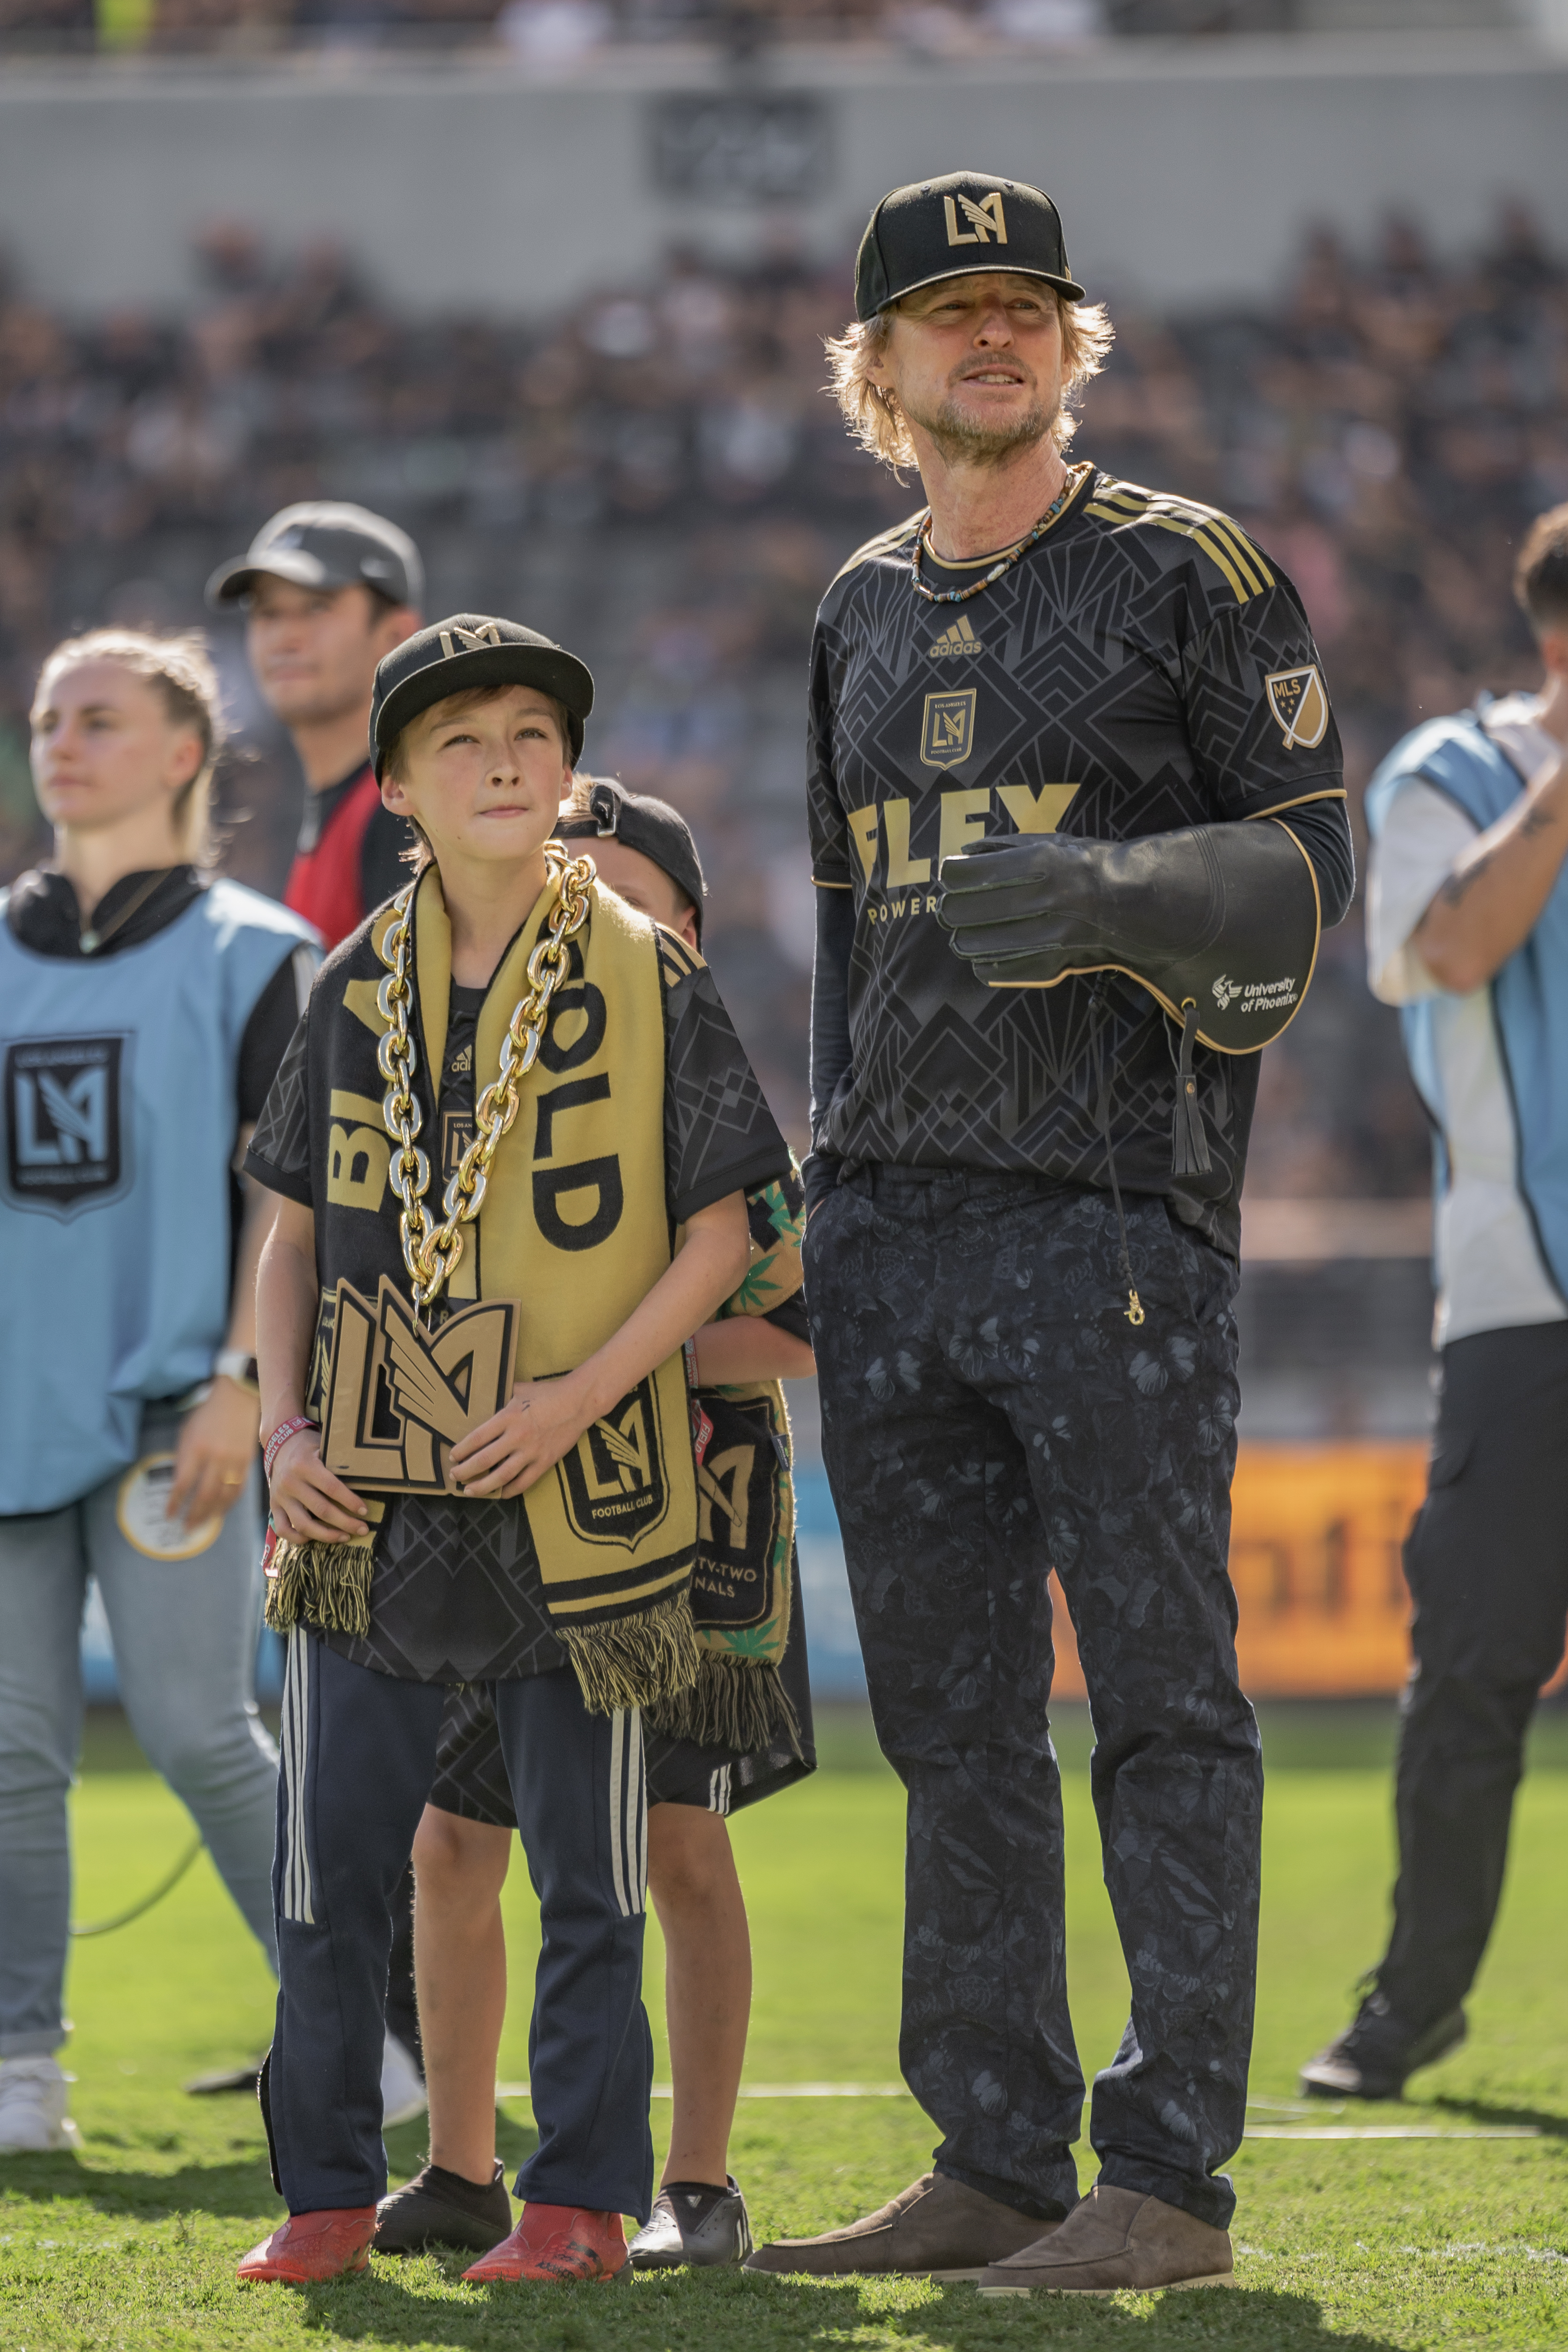 Owen Wilson and his son Ford watch a falcon fly during a game between Austin FC and Los Angeles FC at Banc of California Stadium on October 29, 2022, in Los Angeles, California. | Source: Getty Images